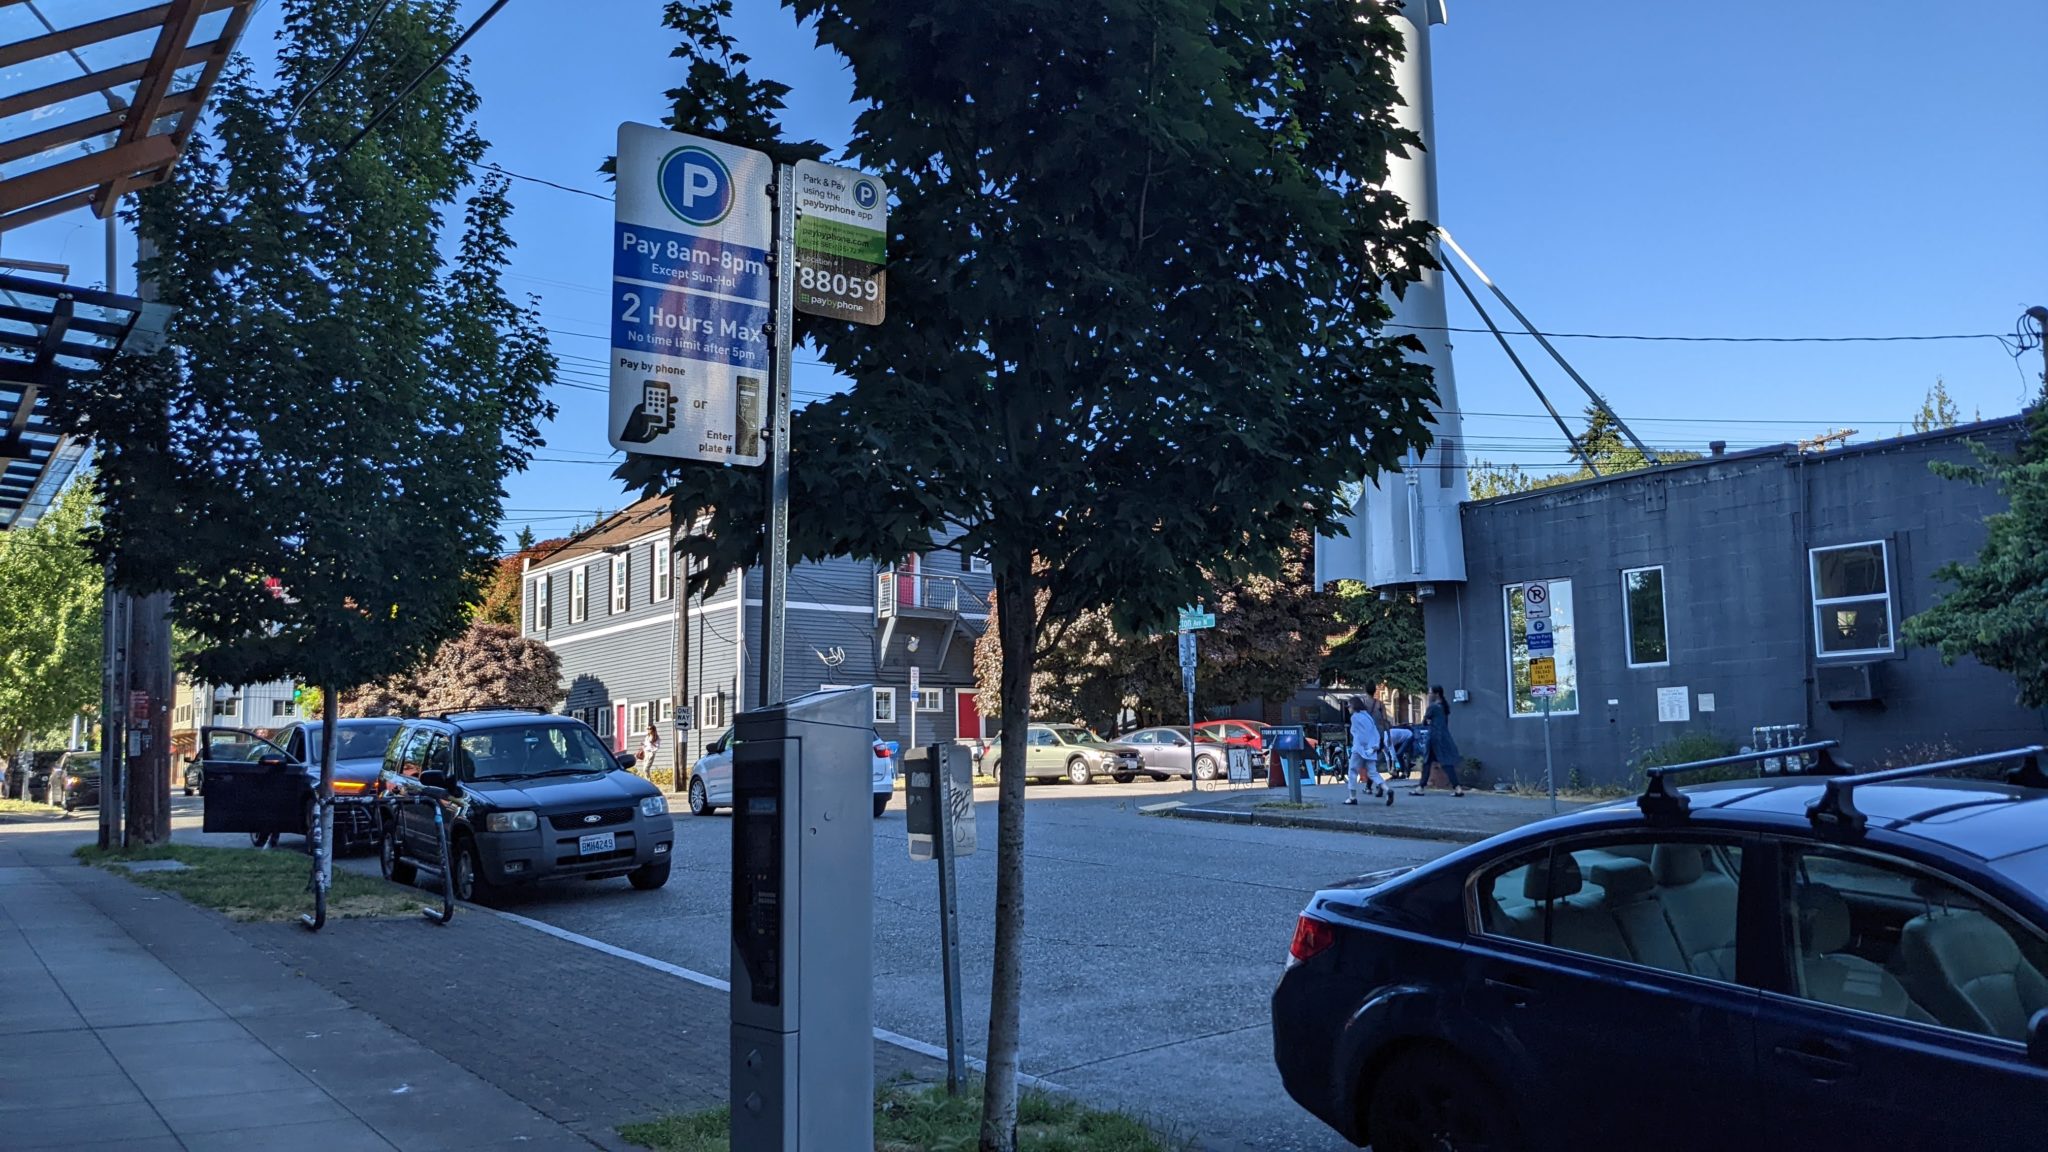 Parked cars on the street in Seattle's Fremont neighborhood. Several parked cars are located next to paid parking signs, trees, and buildings in the area..